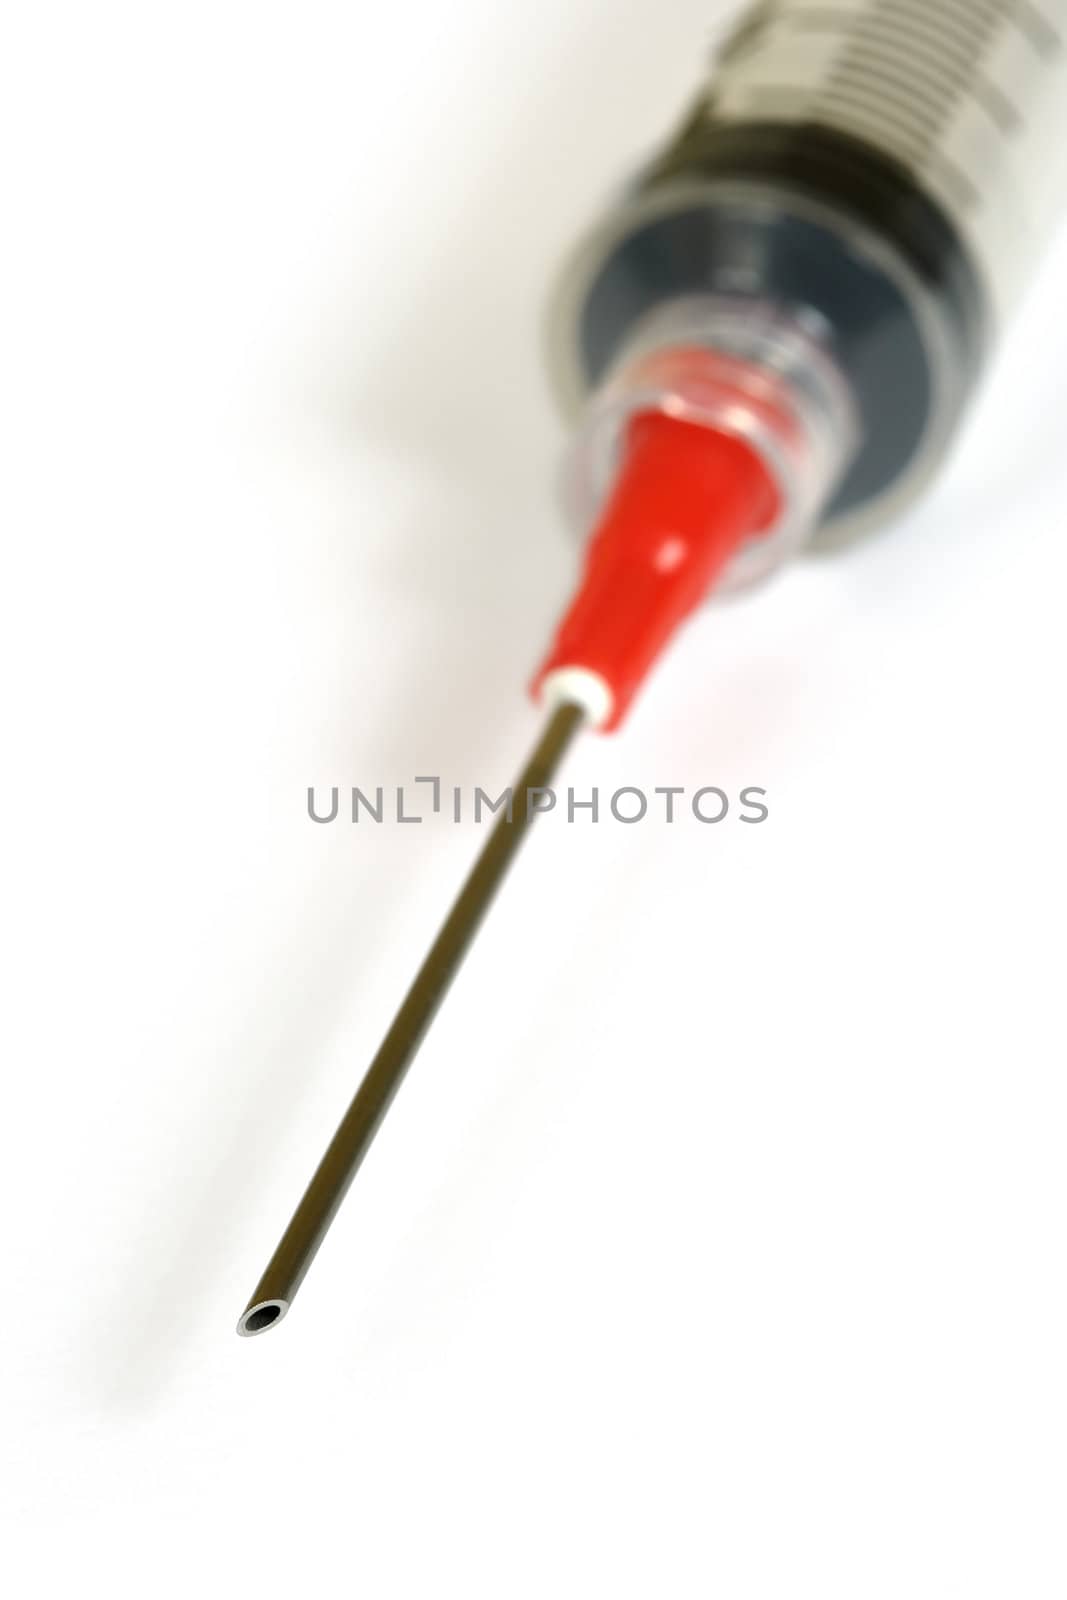 A macro image of the tip of a medical syringe.
